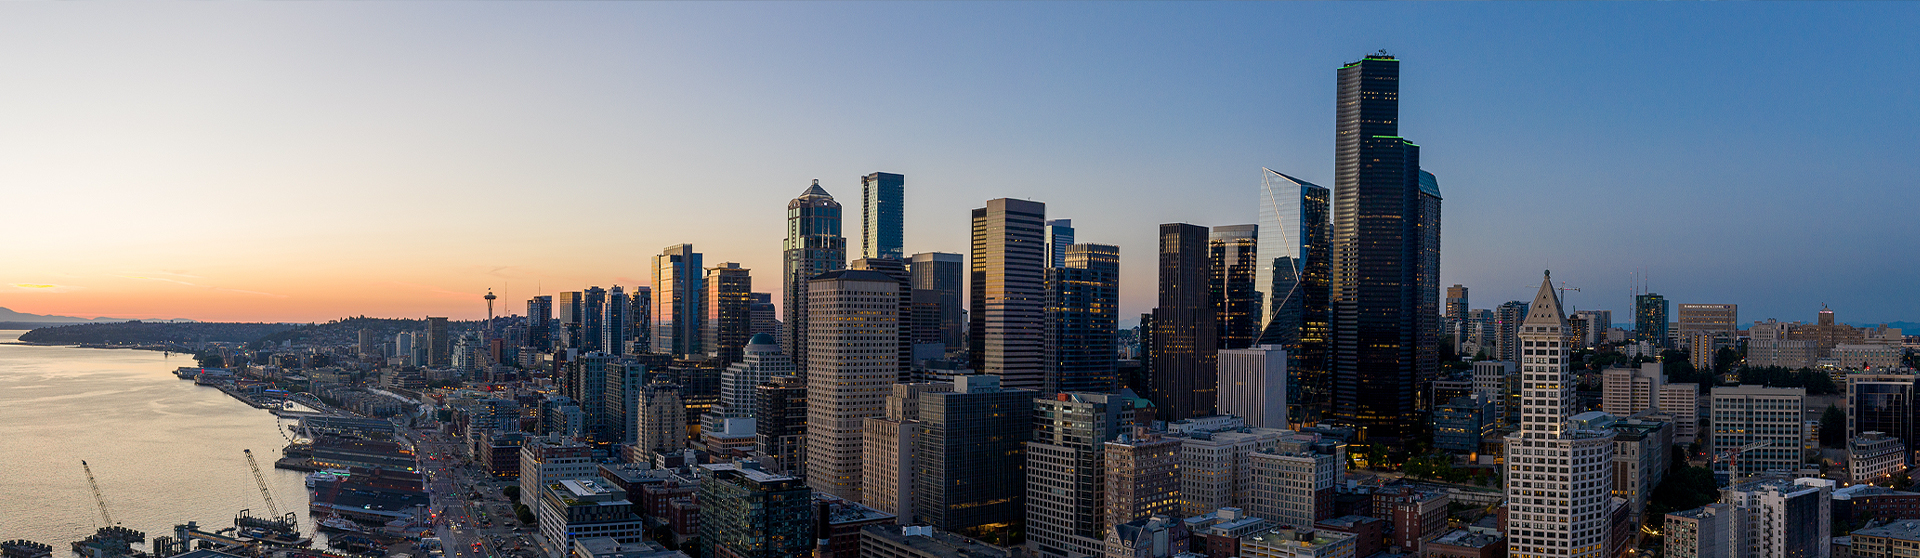 view of some of Seattles city buildings during sunset